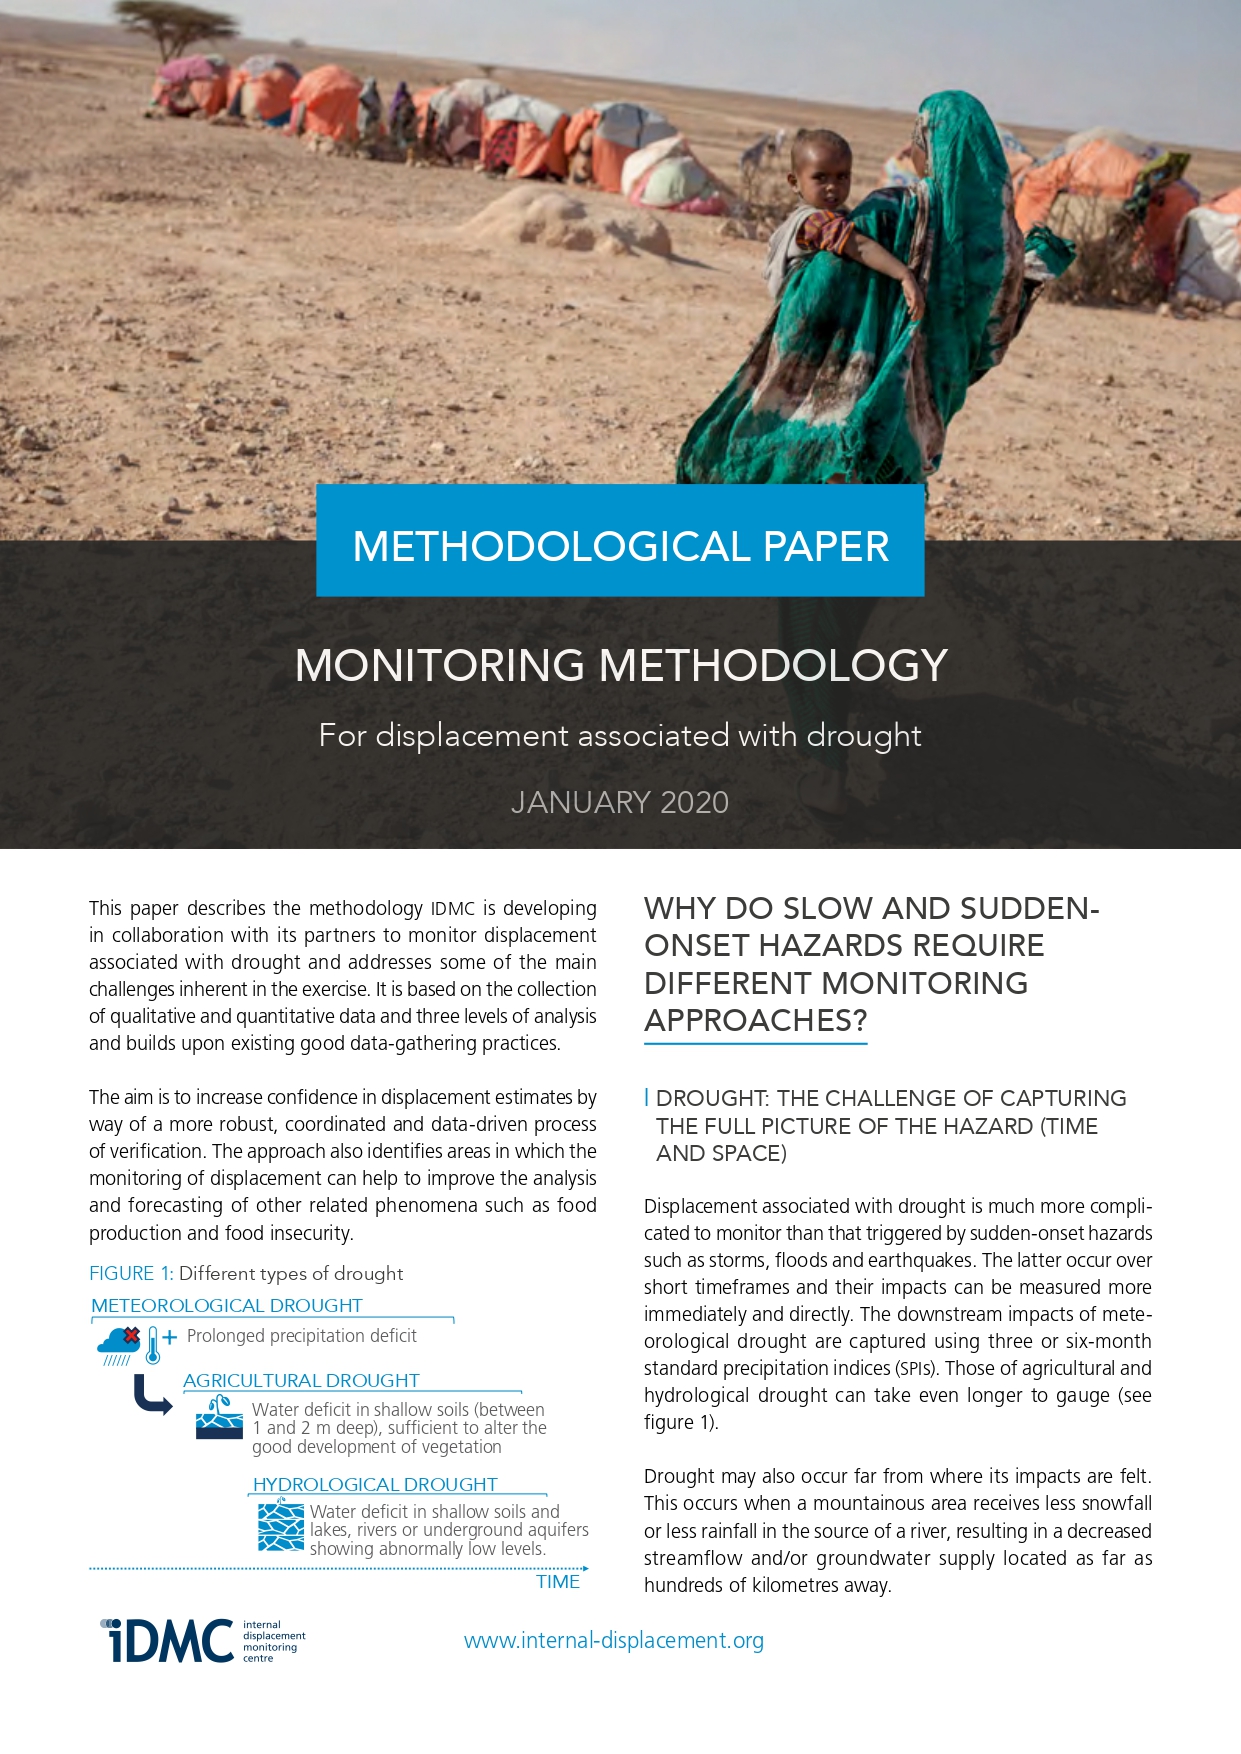 Monitoring methodology for displacement associated with drought